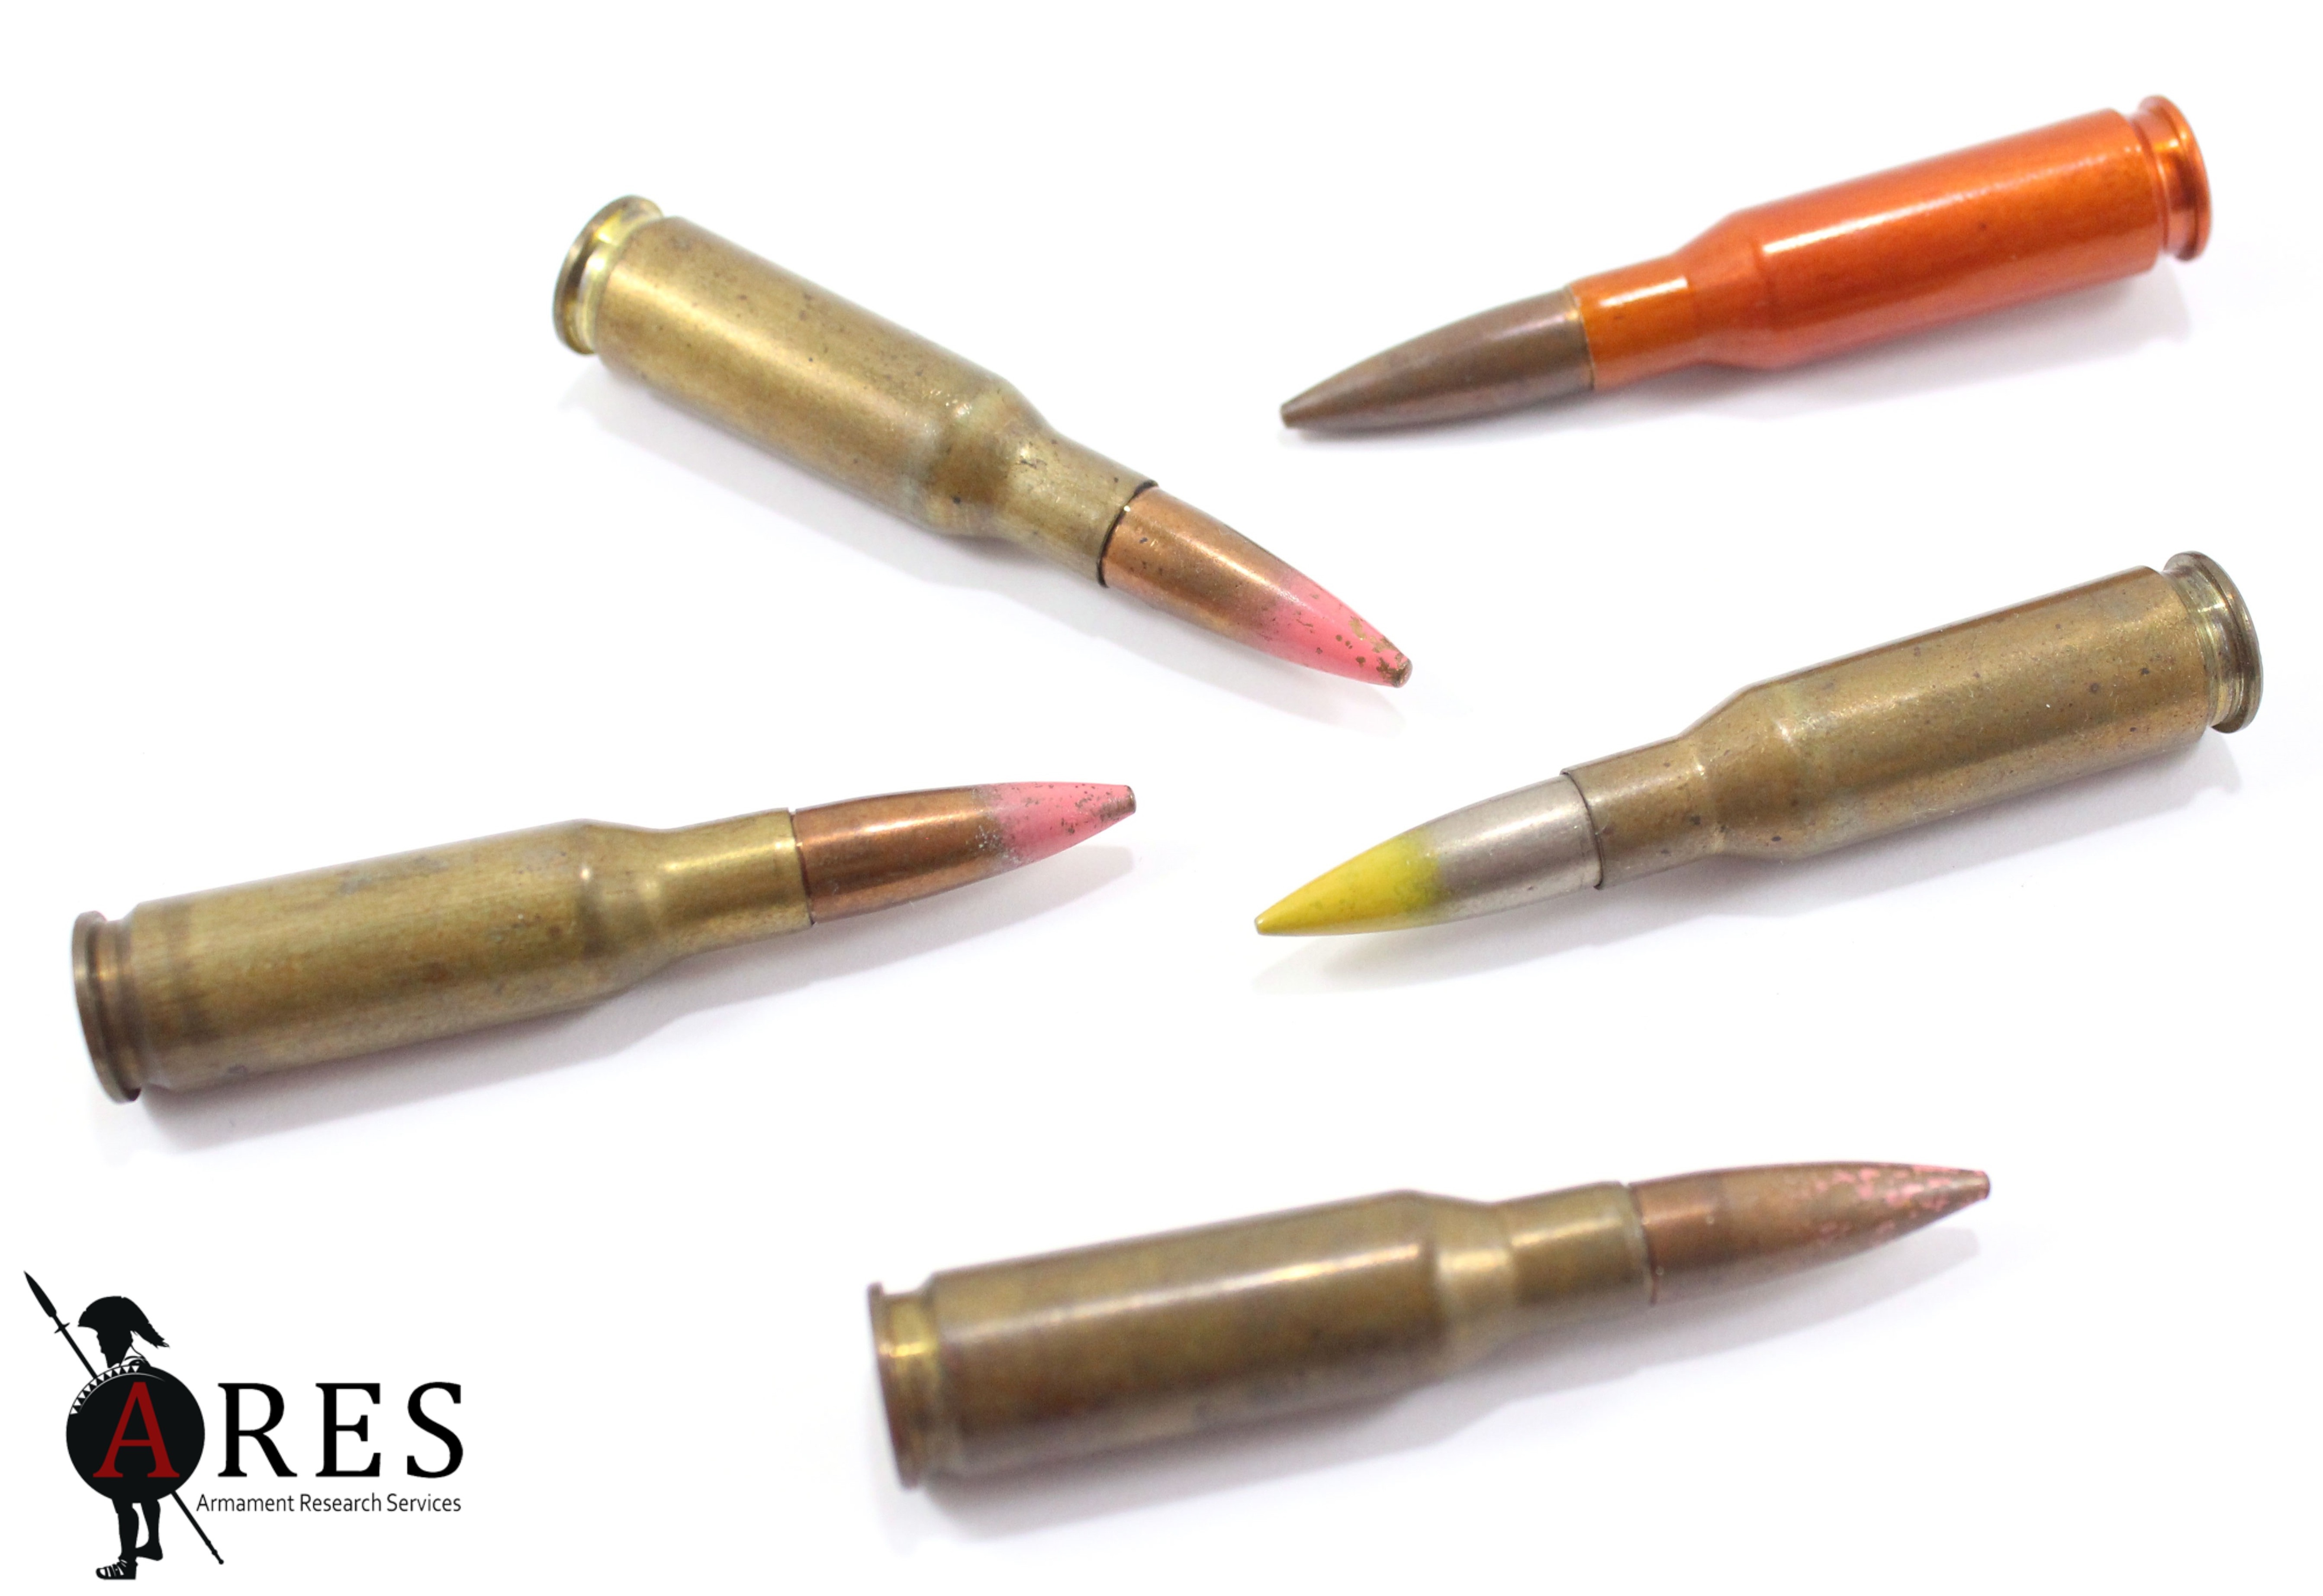 a-cartridge-in-brief-280-british-armament-research-services-ares